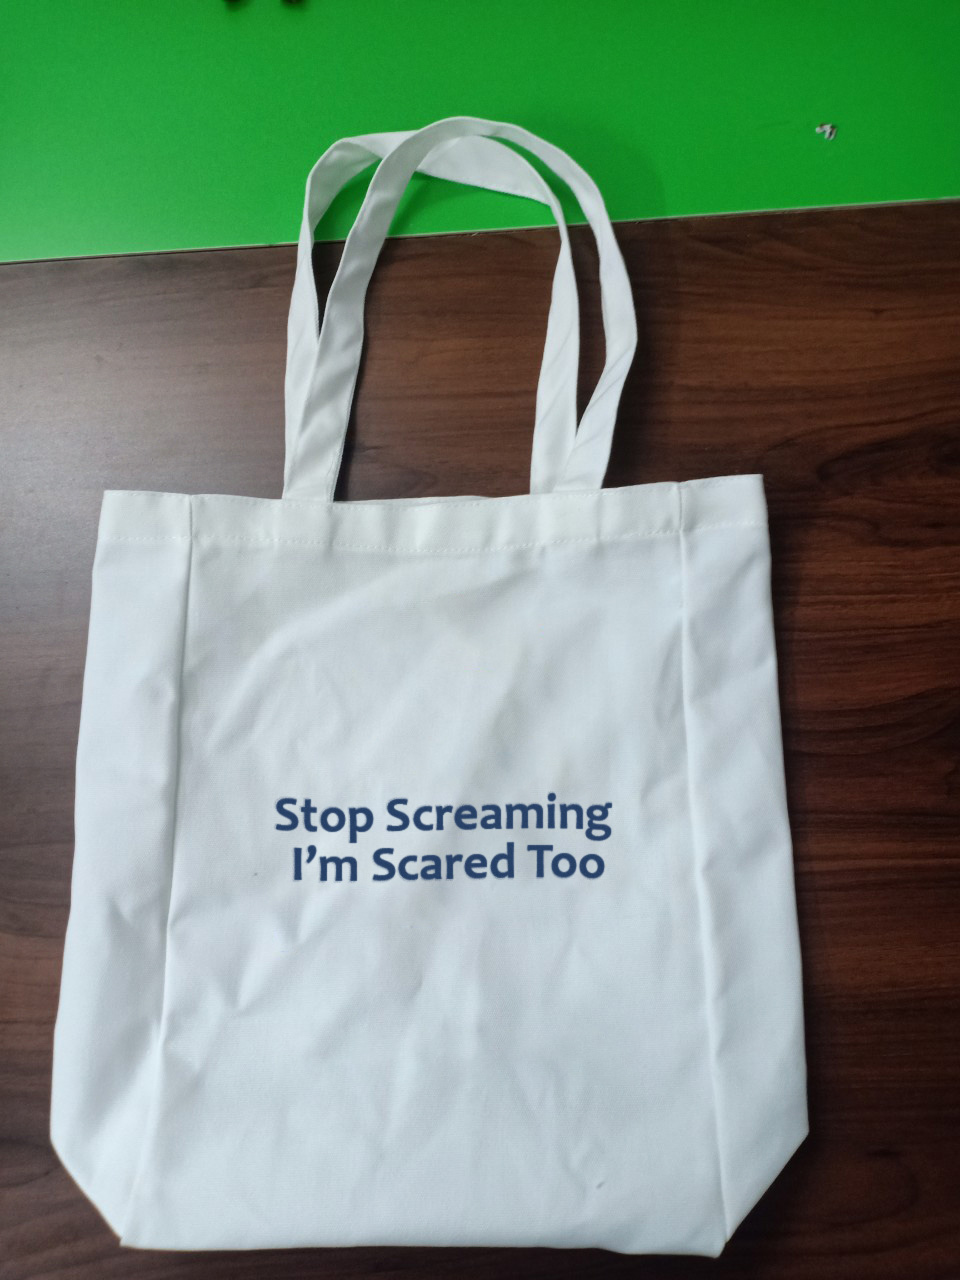 Best Sale Stop Screaming I’m Scared Too Canvas Aesthetic Tote Bag for Women Beach Bag, Shopping Bag, Shoulder Bag, Reusable, Grocery Bag